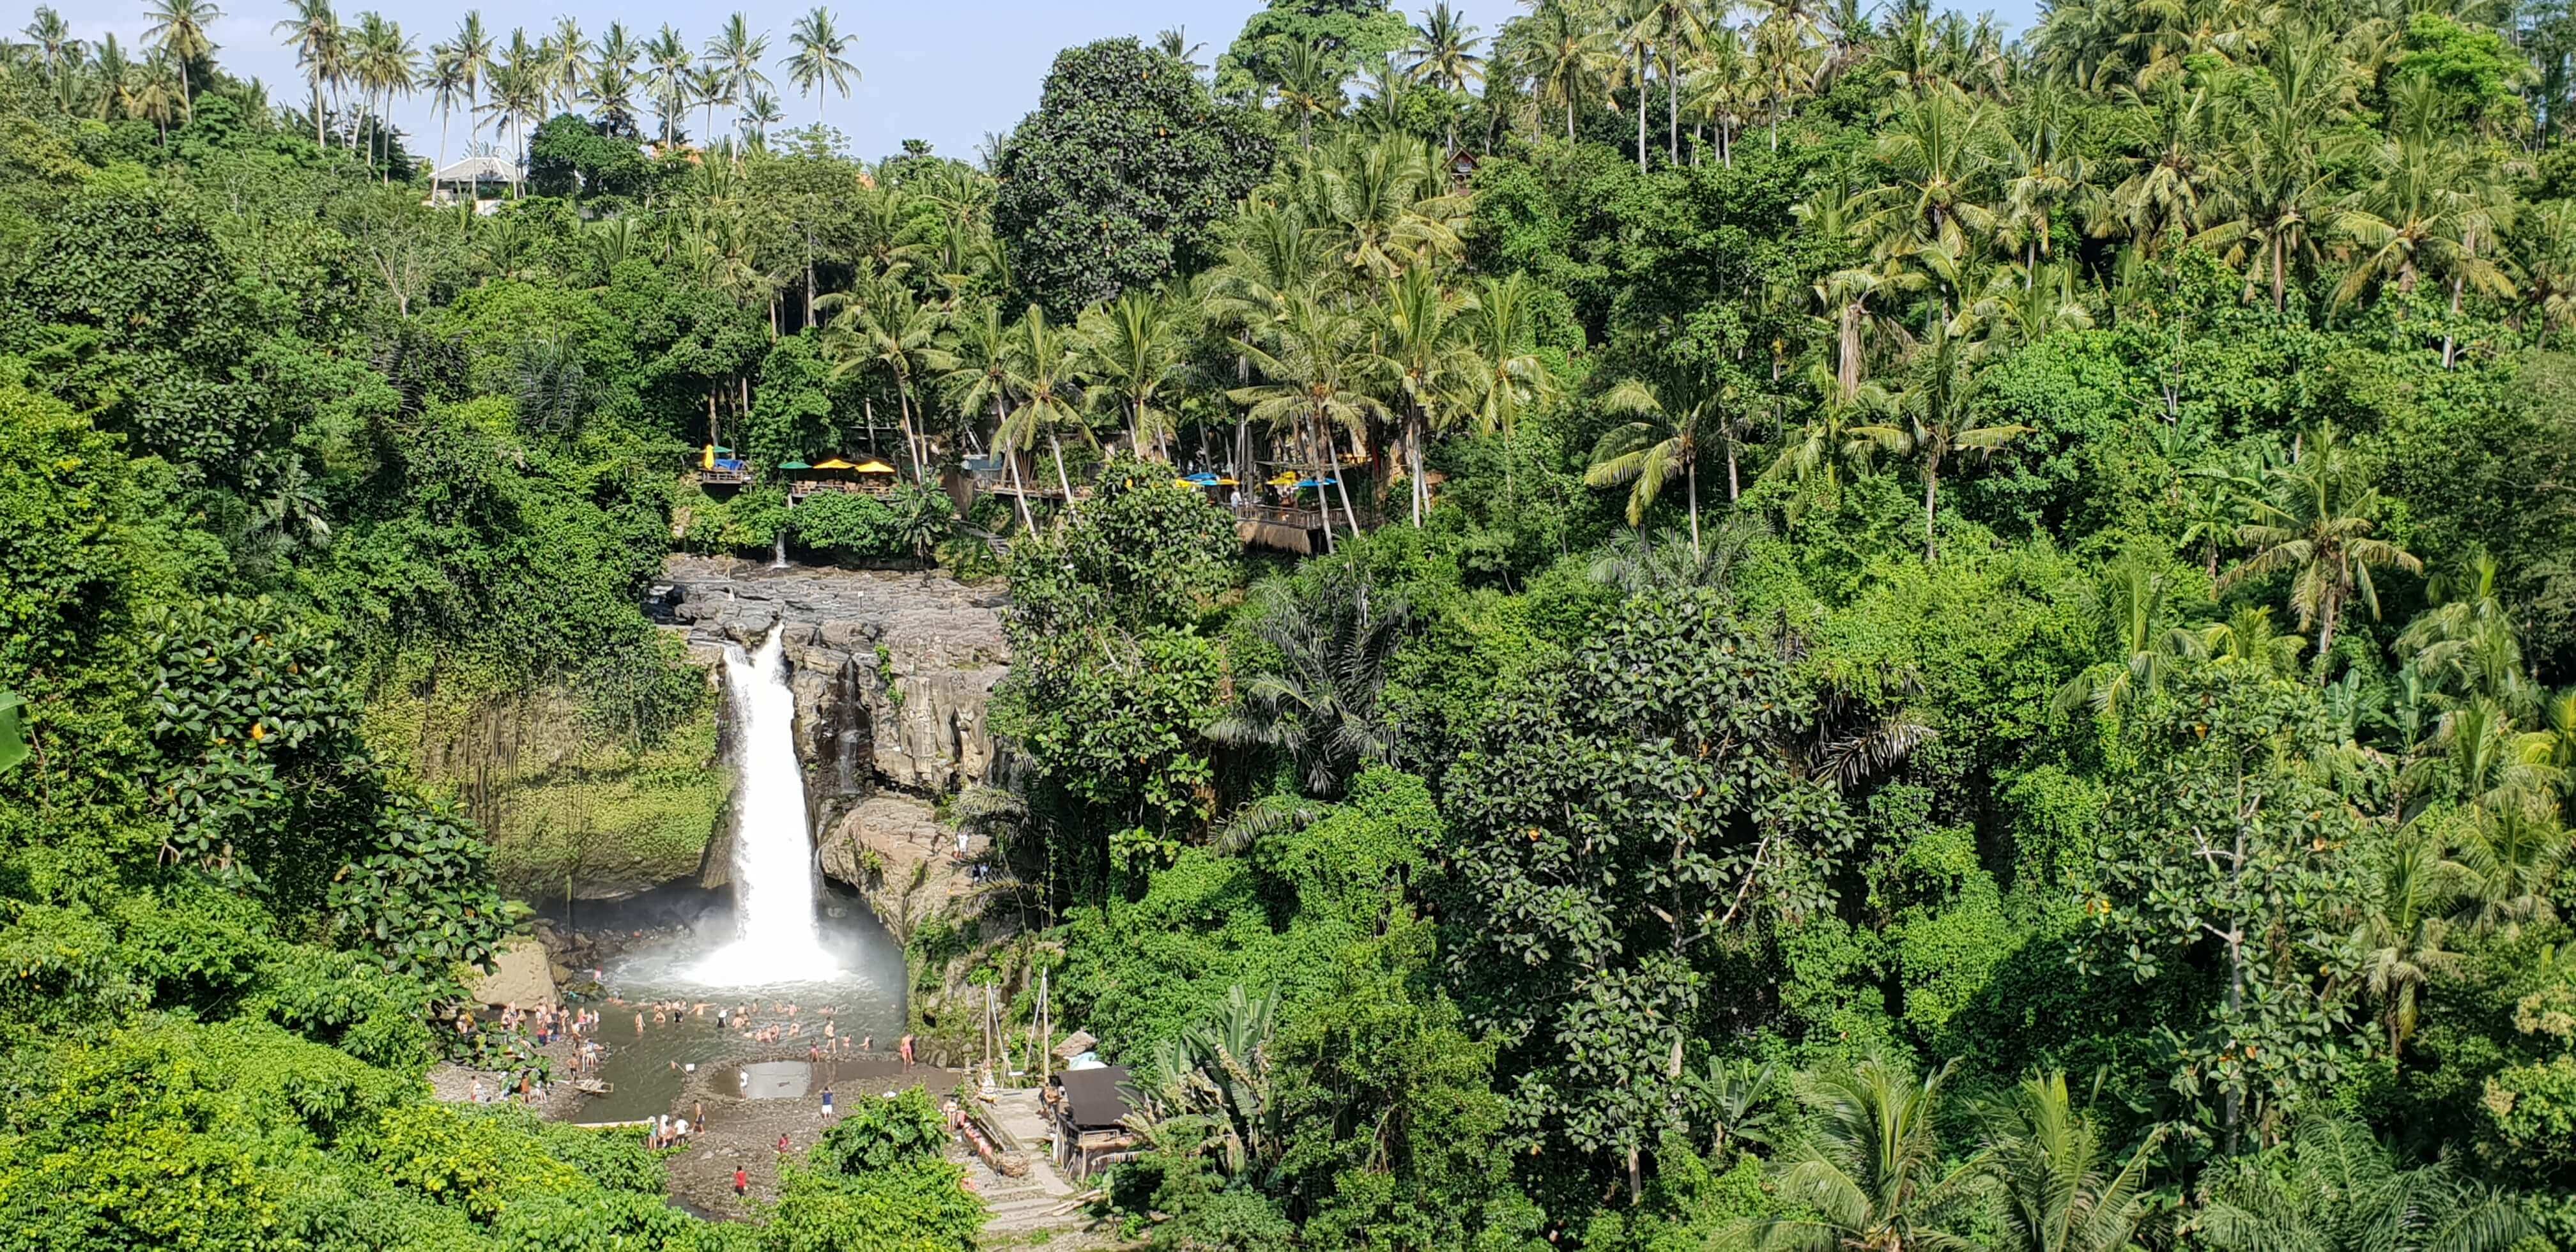 Tegenungan Waterfall is the most popular waterfall in the Ubud itinerary